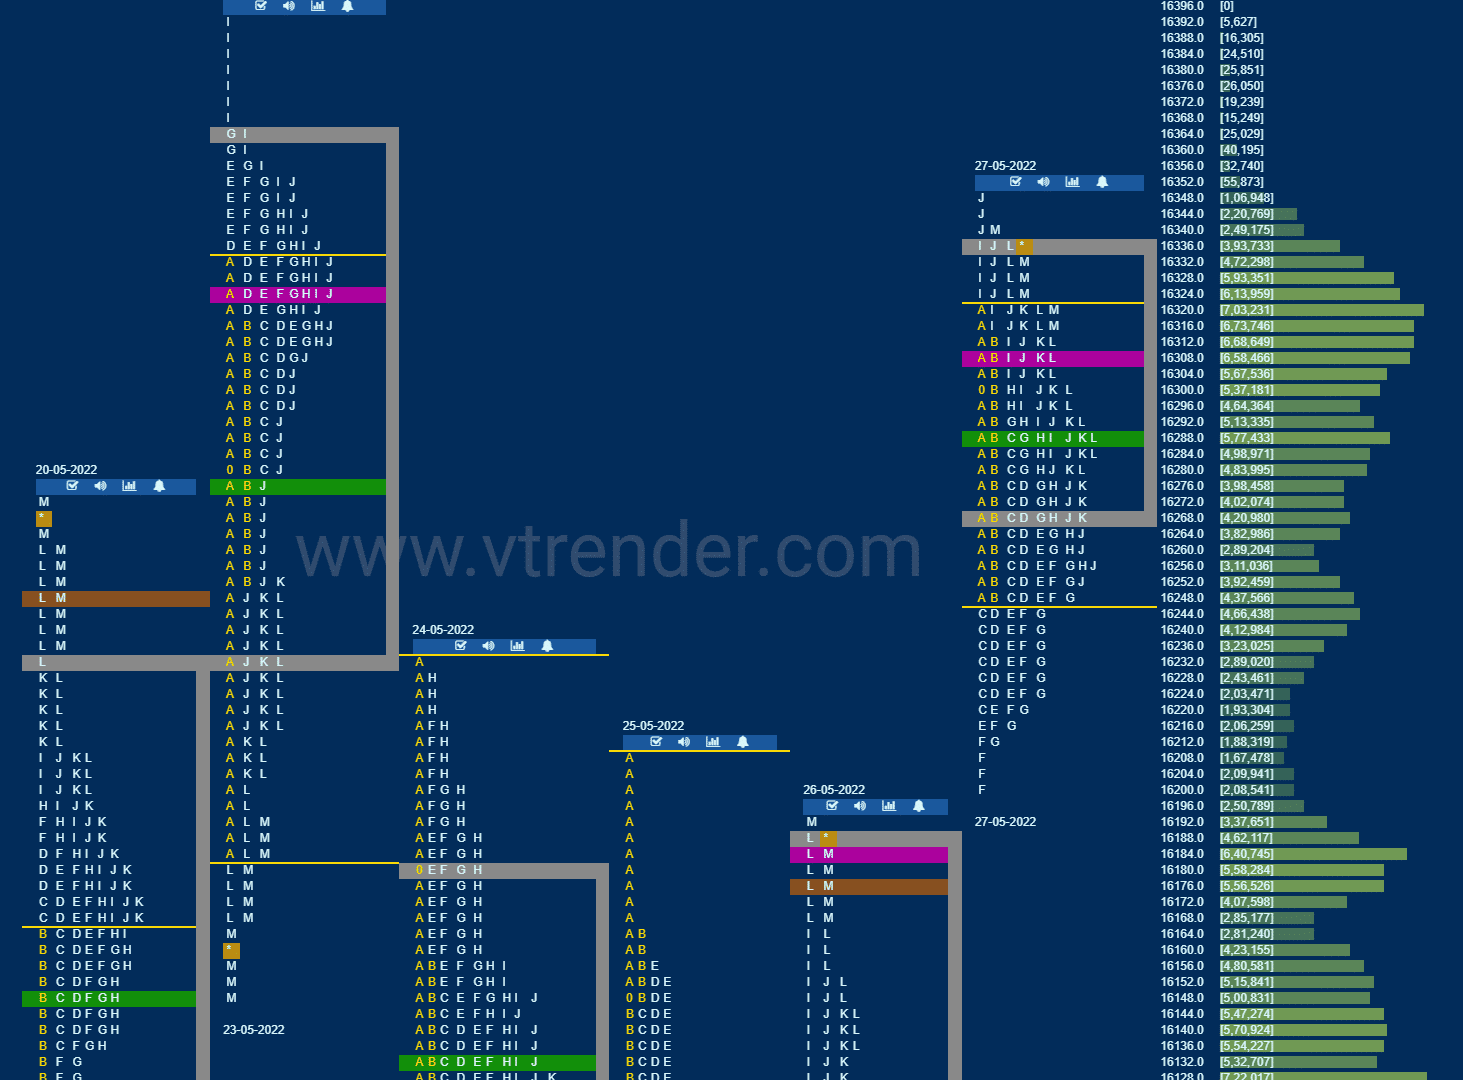 Nf 19 Market Profile Analysis Dated 27Th May 2022 Banknifty Futures, Charts, Day Trading, Intraday Trading, Intraday Trading Strategies, Market Profile, Market Profile Trading Strategies, Nifty Futures, Order Flow Analysis, Support And Resistance, Technical Analysis, Trading Strategies, Volume Profile Trading